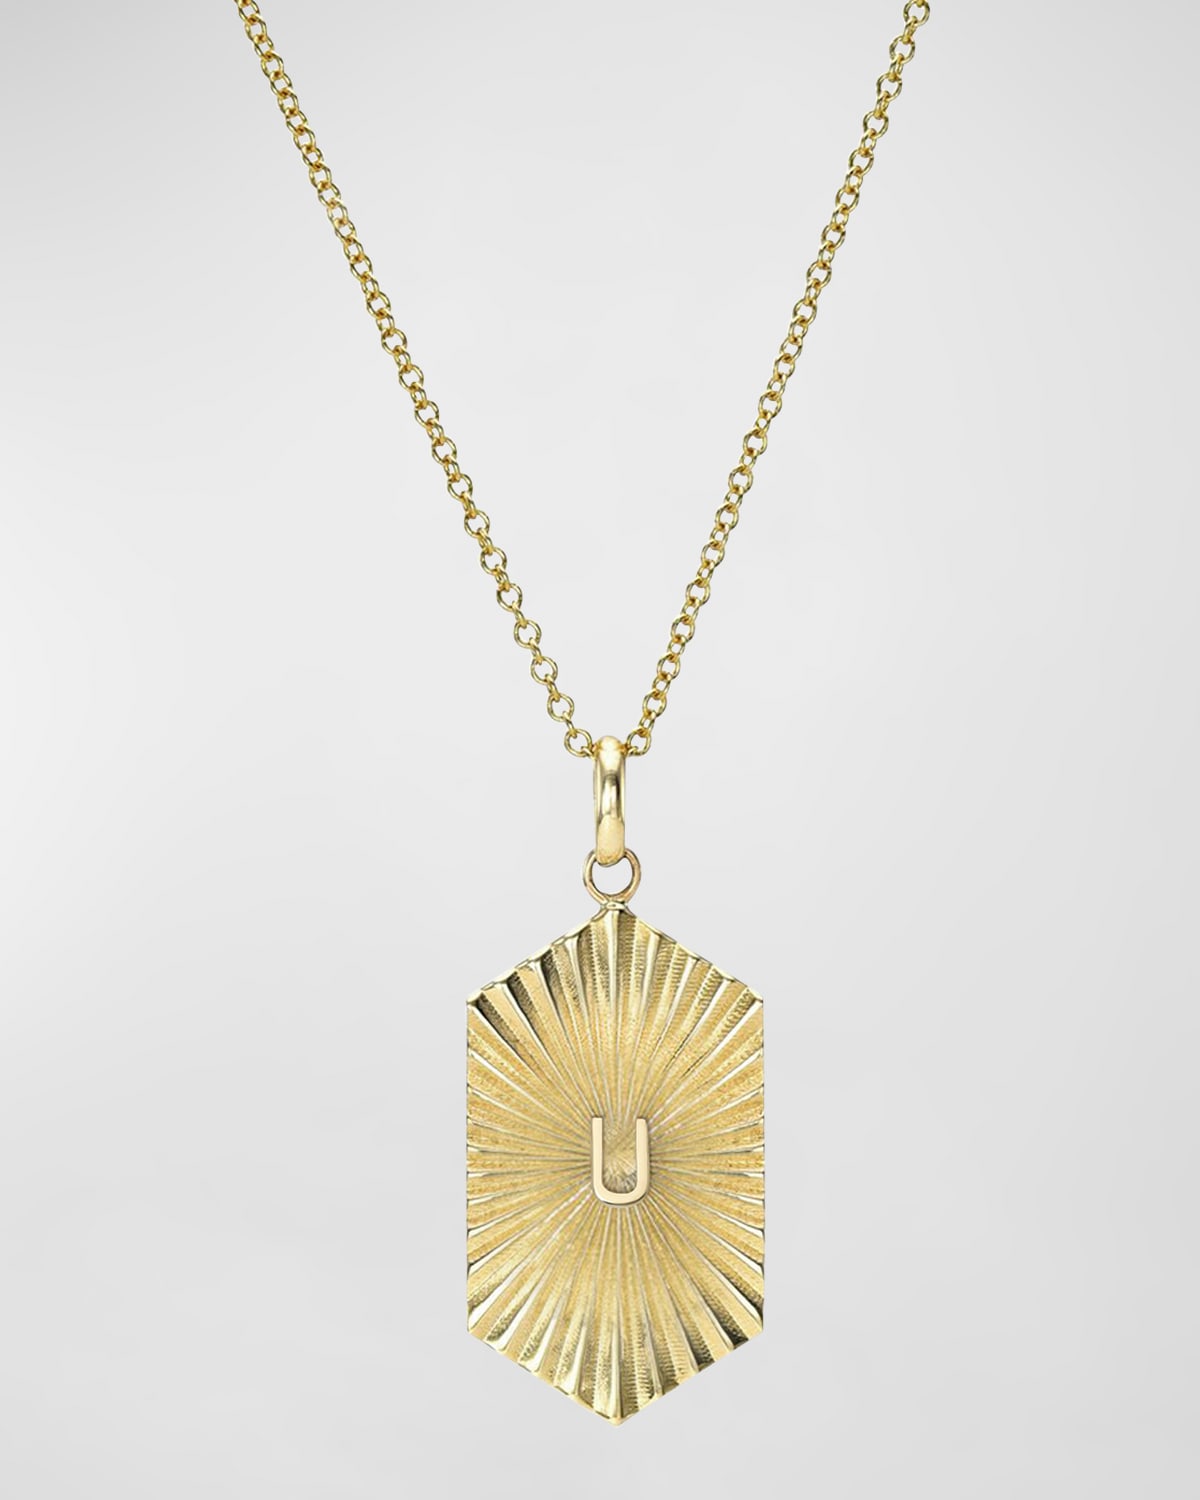 Zoe Lev Jewelry 14k Gold Pleated Shield With Initial Necklace In U